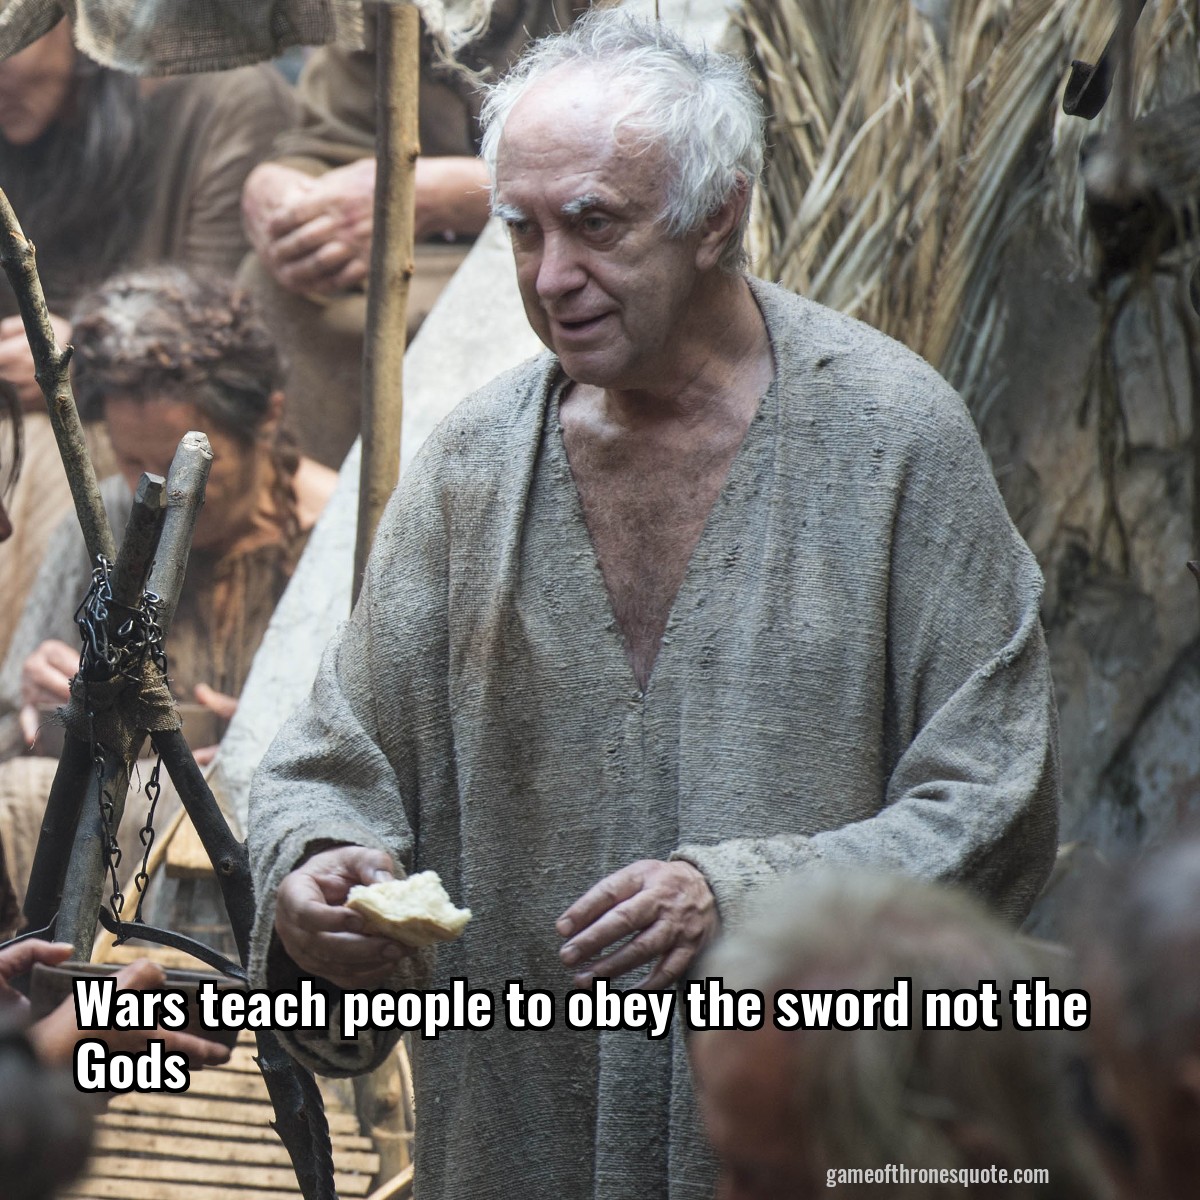 Wars teach people to obey the sword not the Gods